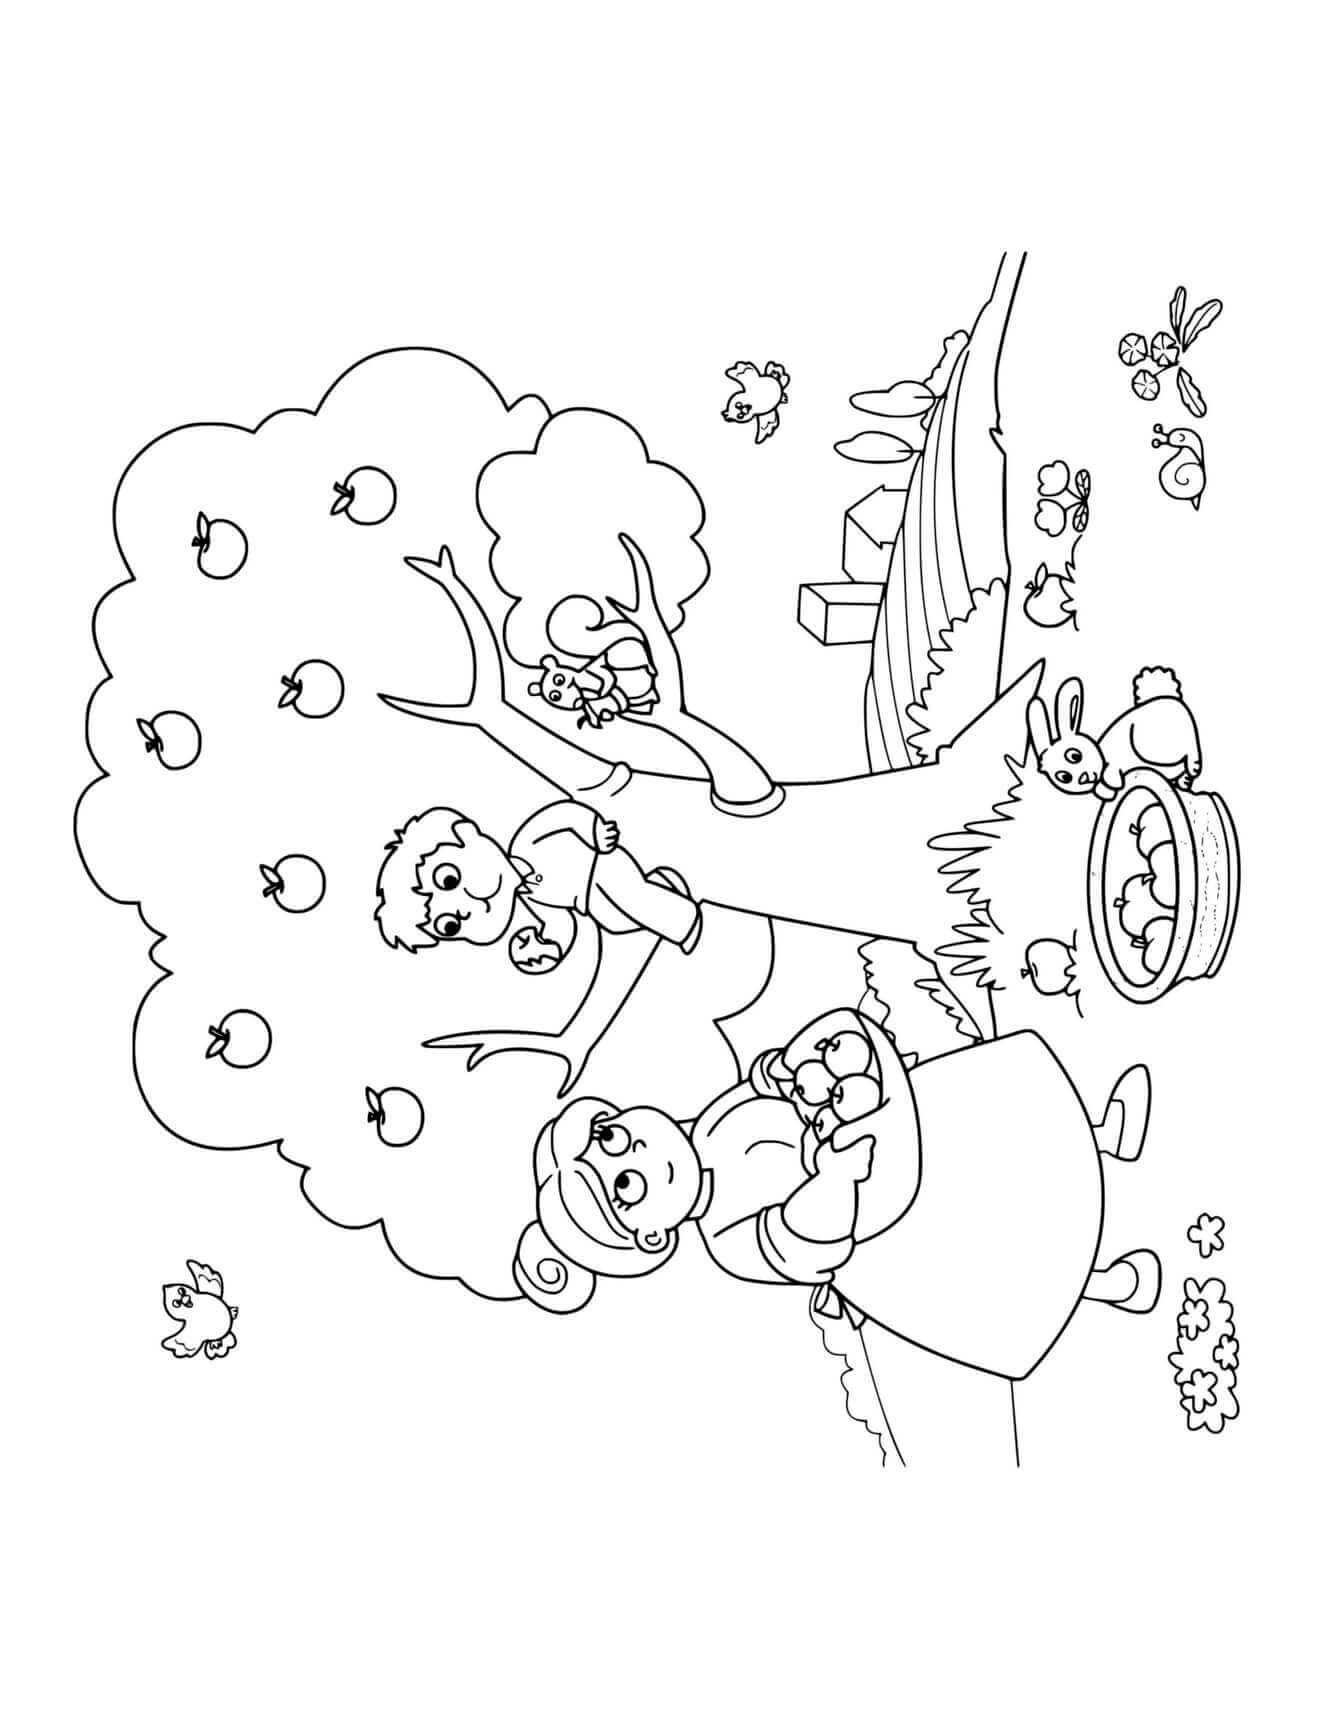 Fall Picking The Apples Mother Child Coloring Page